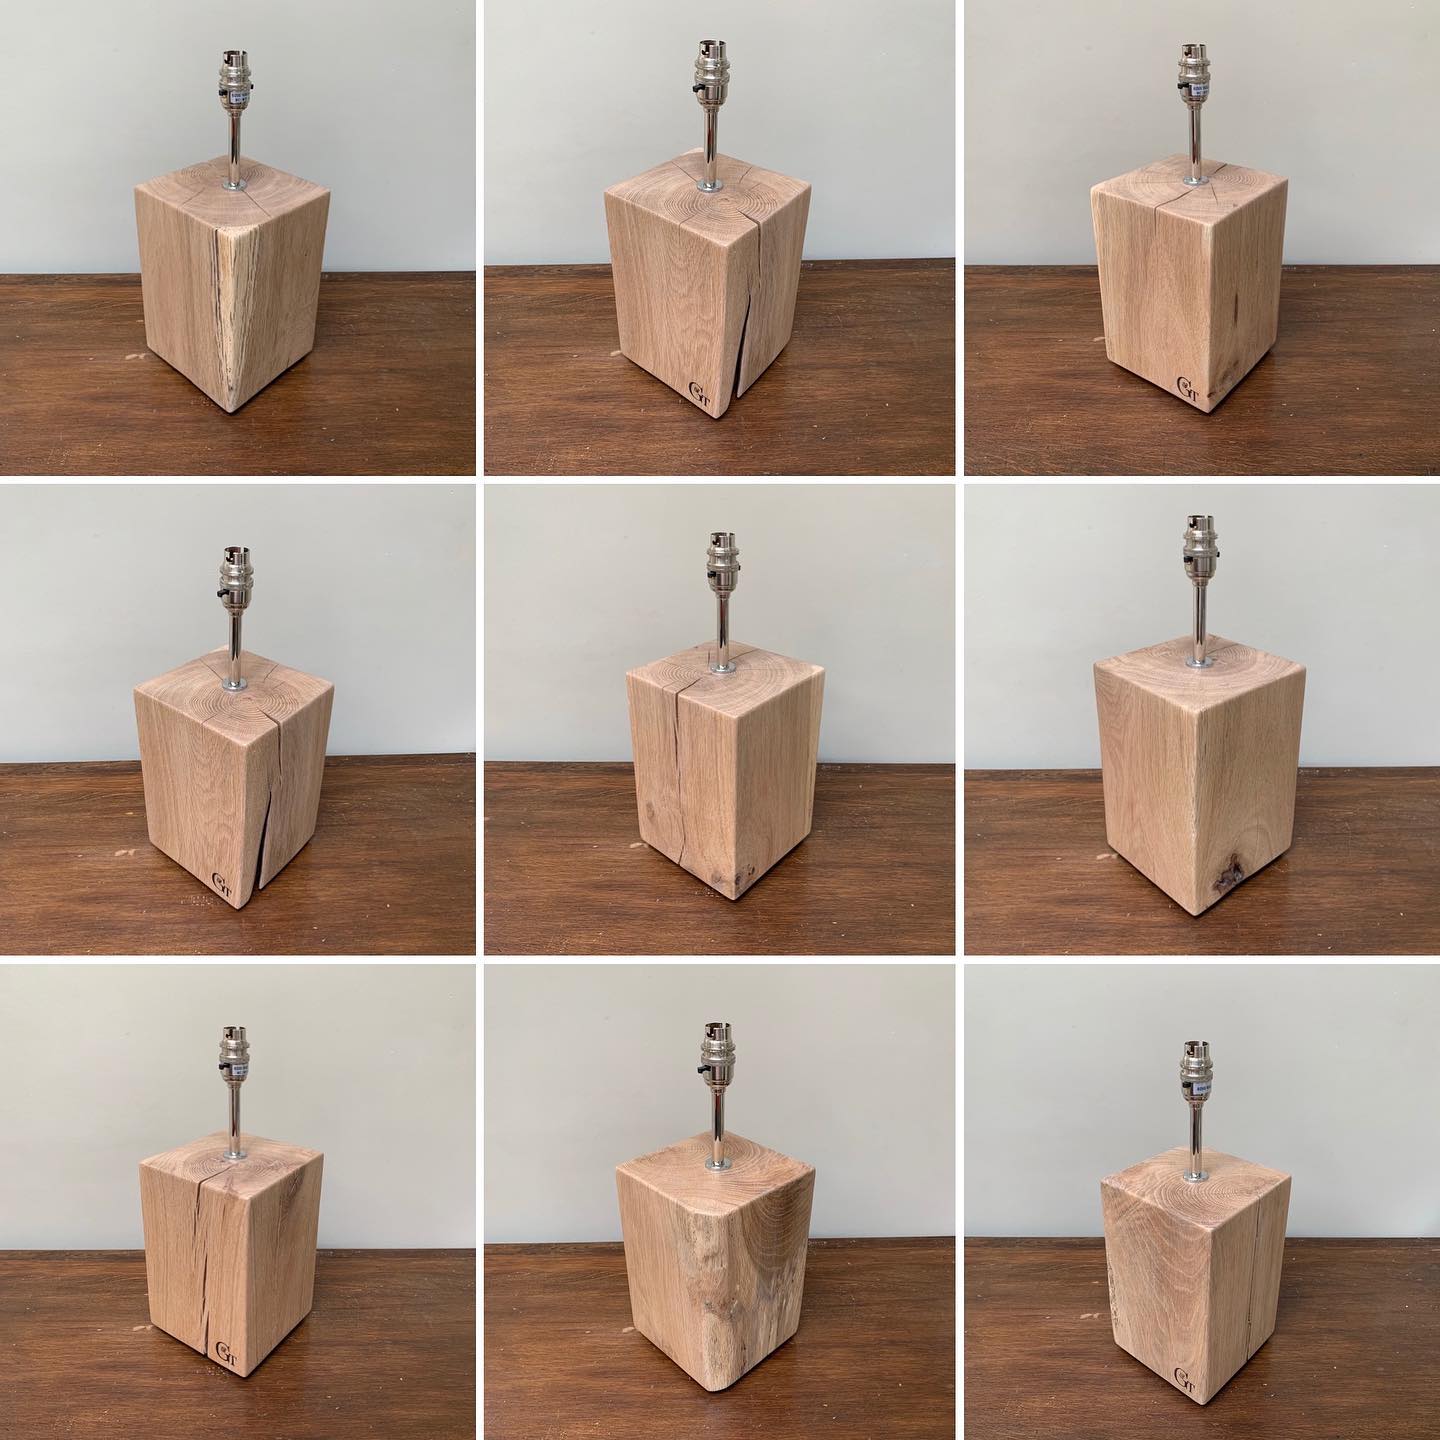 We now have a small collection of oak lamps available on our website.as each has its own unique character, you can select the exact one you’d like. We also have some extra large lamps in a darker finish, using beautiful wonky pieces of oak. These will be available at upcoming markets or if you’d like to see them, feel free to get in touch and we can send over some details. ...#handcrafted #homewares #lighting #livingroomdecor #uniquegifts #lamp #oak #characterpiece #homedecor